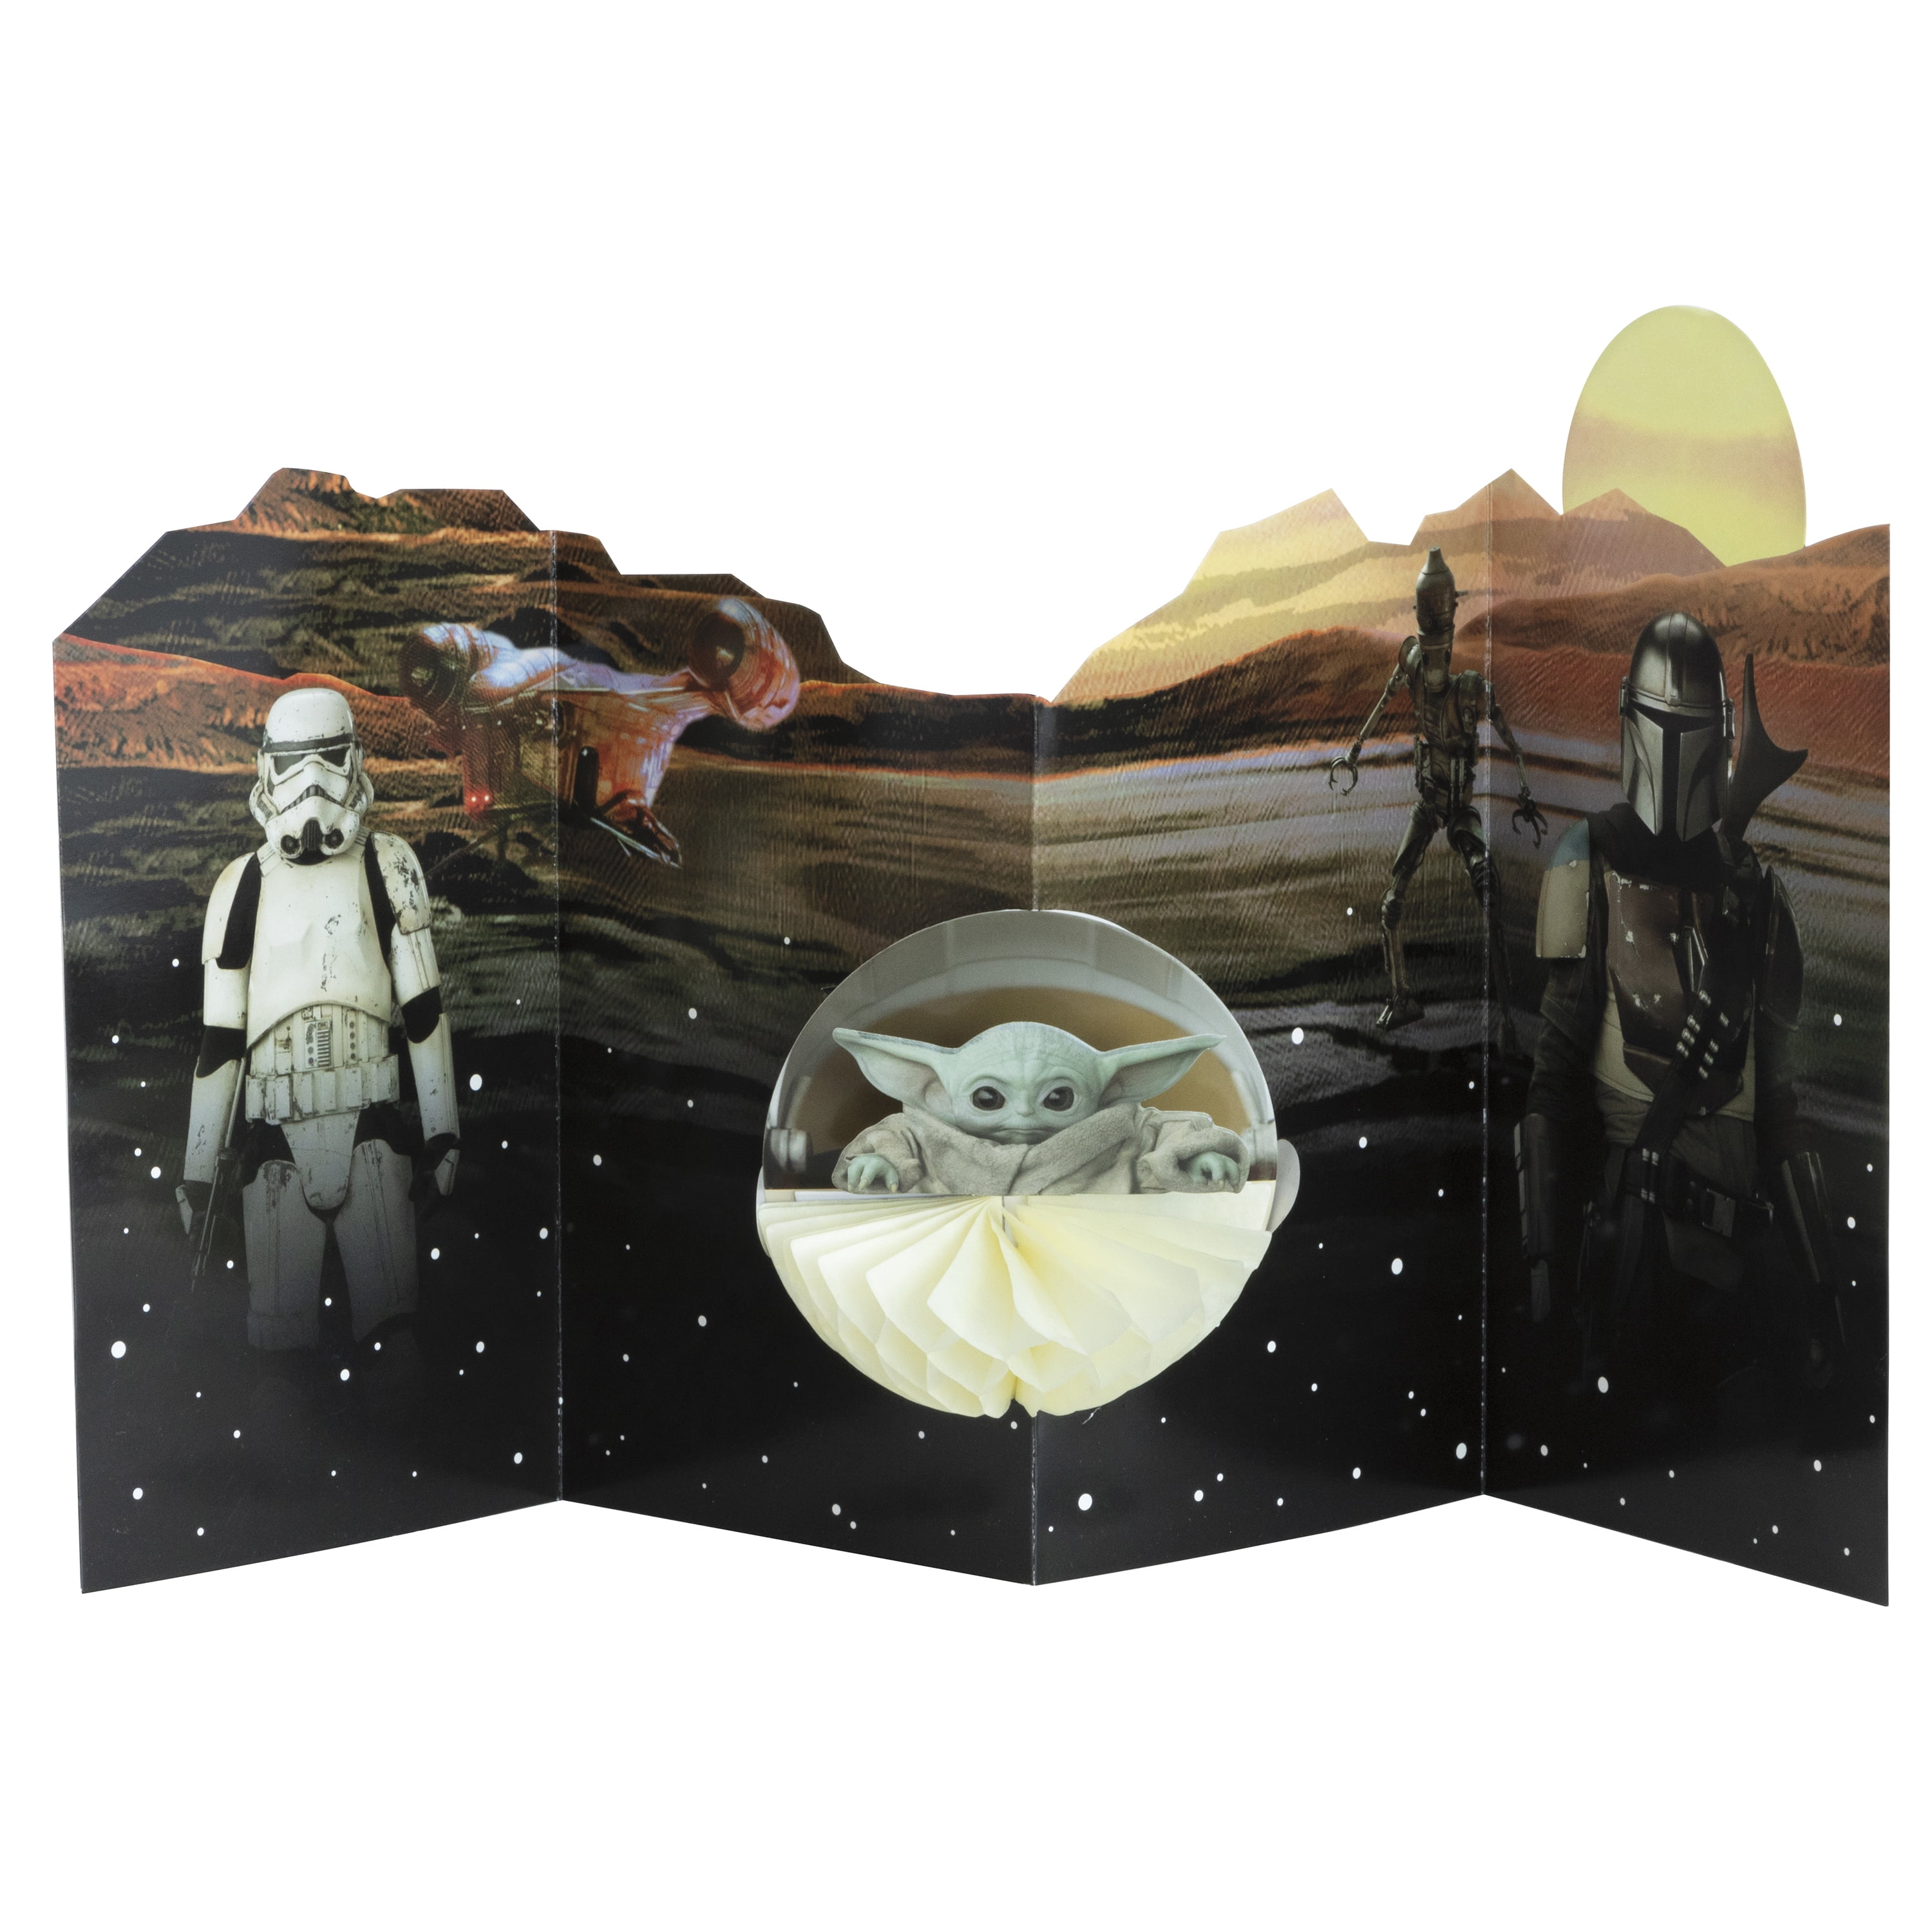 3D Mandalorian Wall Art and Table Décor Crafted Hand Painted Inspired By Star Wars 